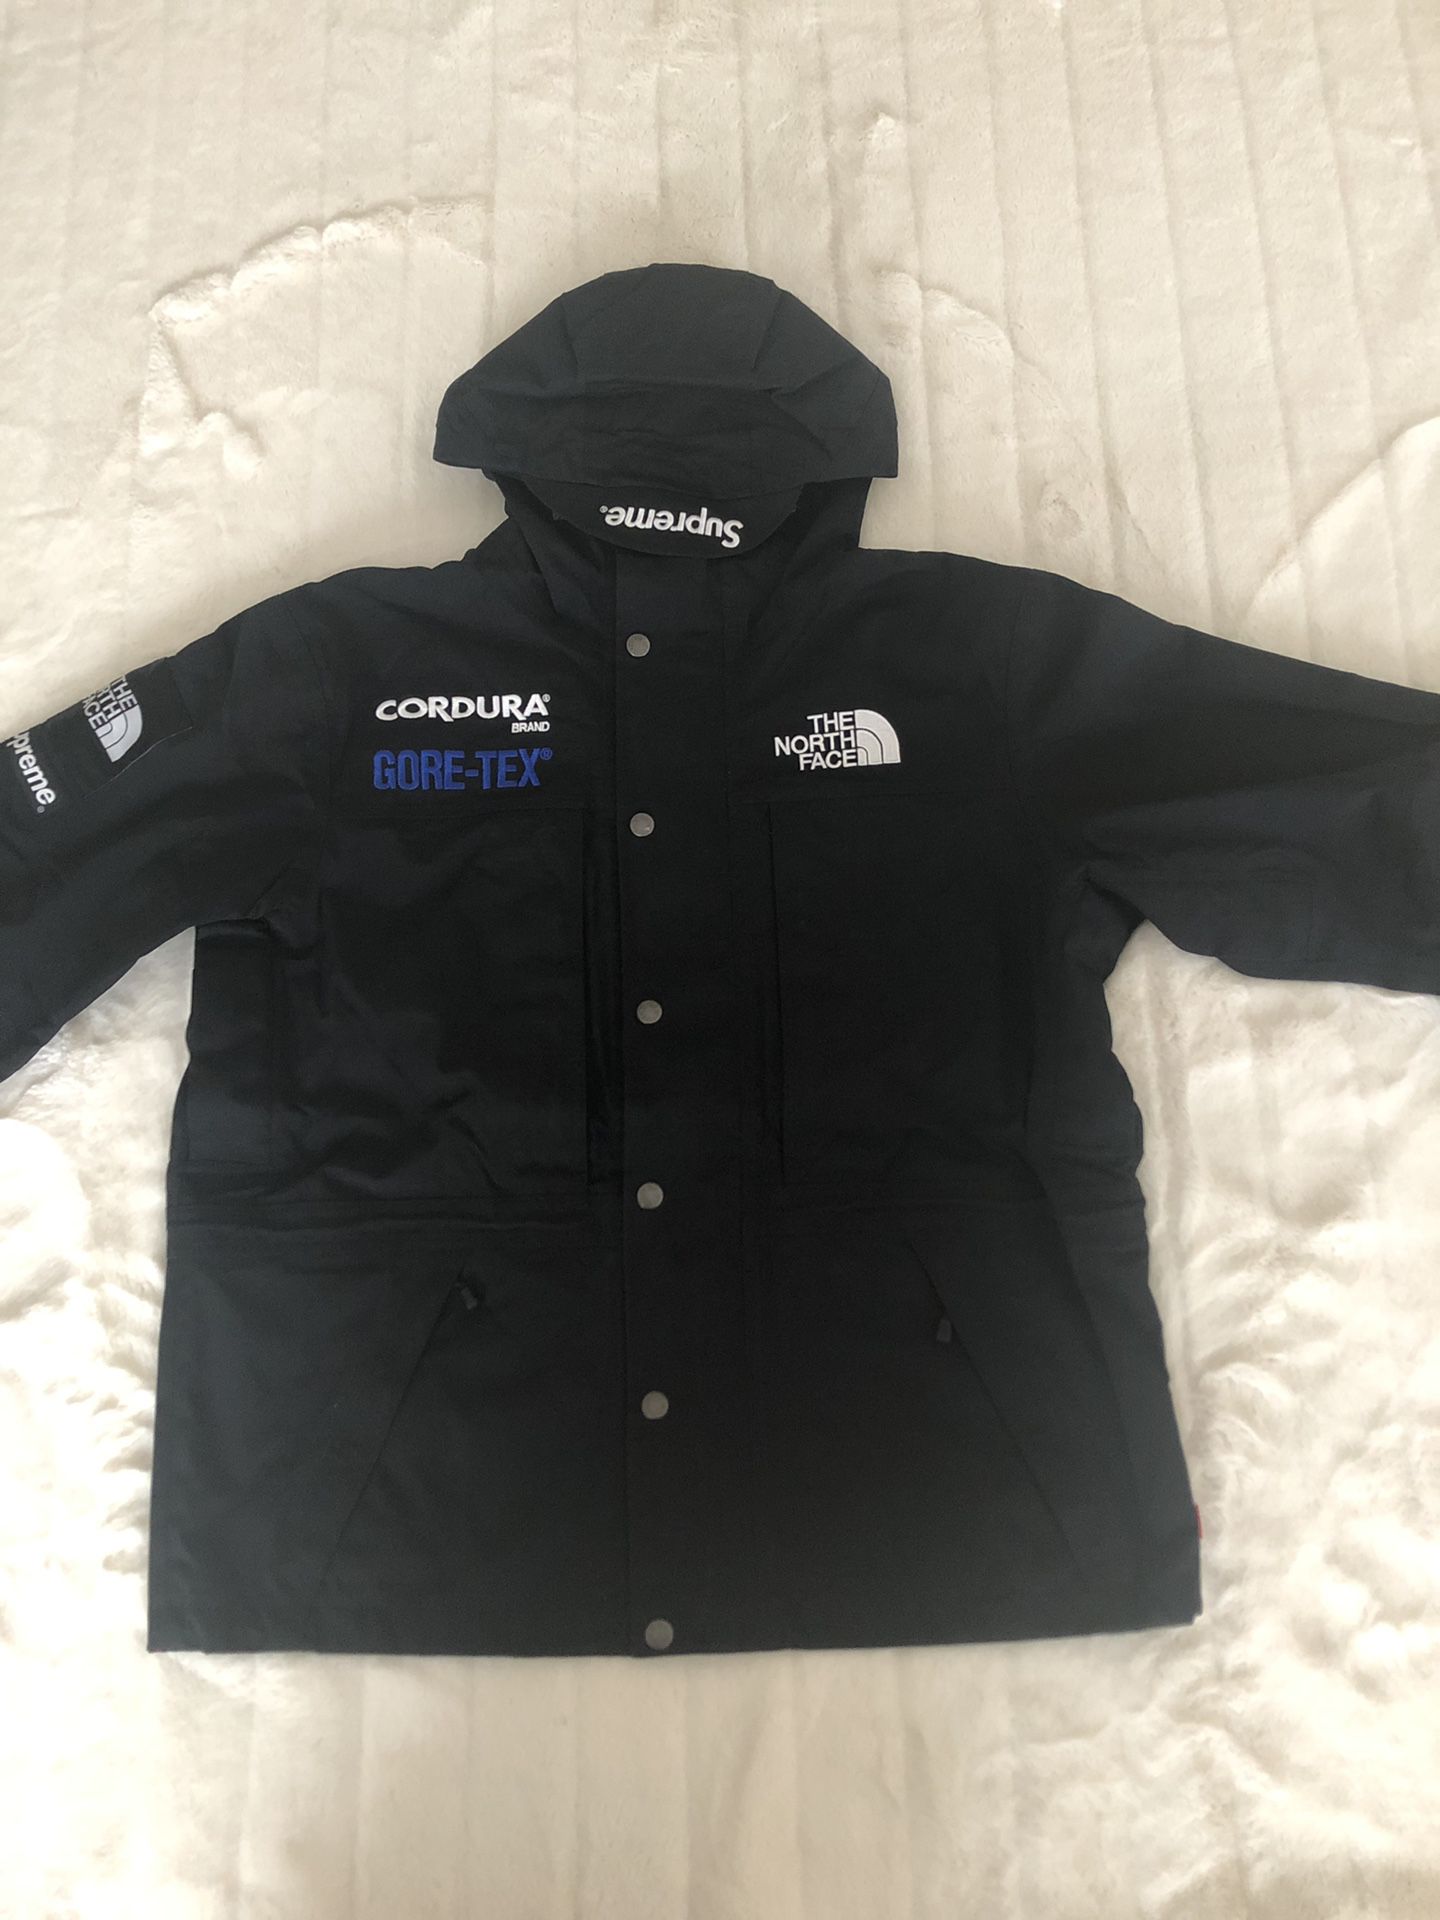 Supreme northface expedition jacket black Sz Small brand new